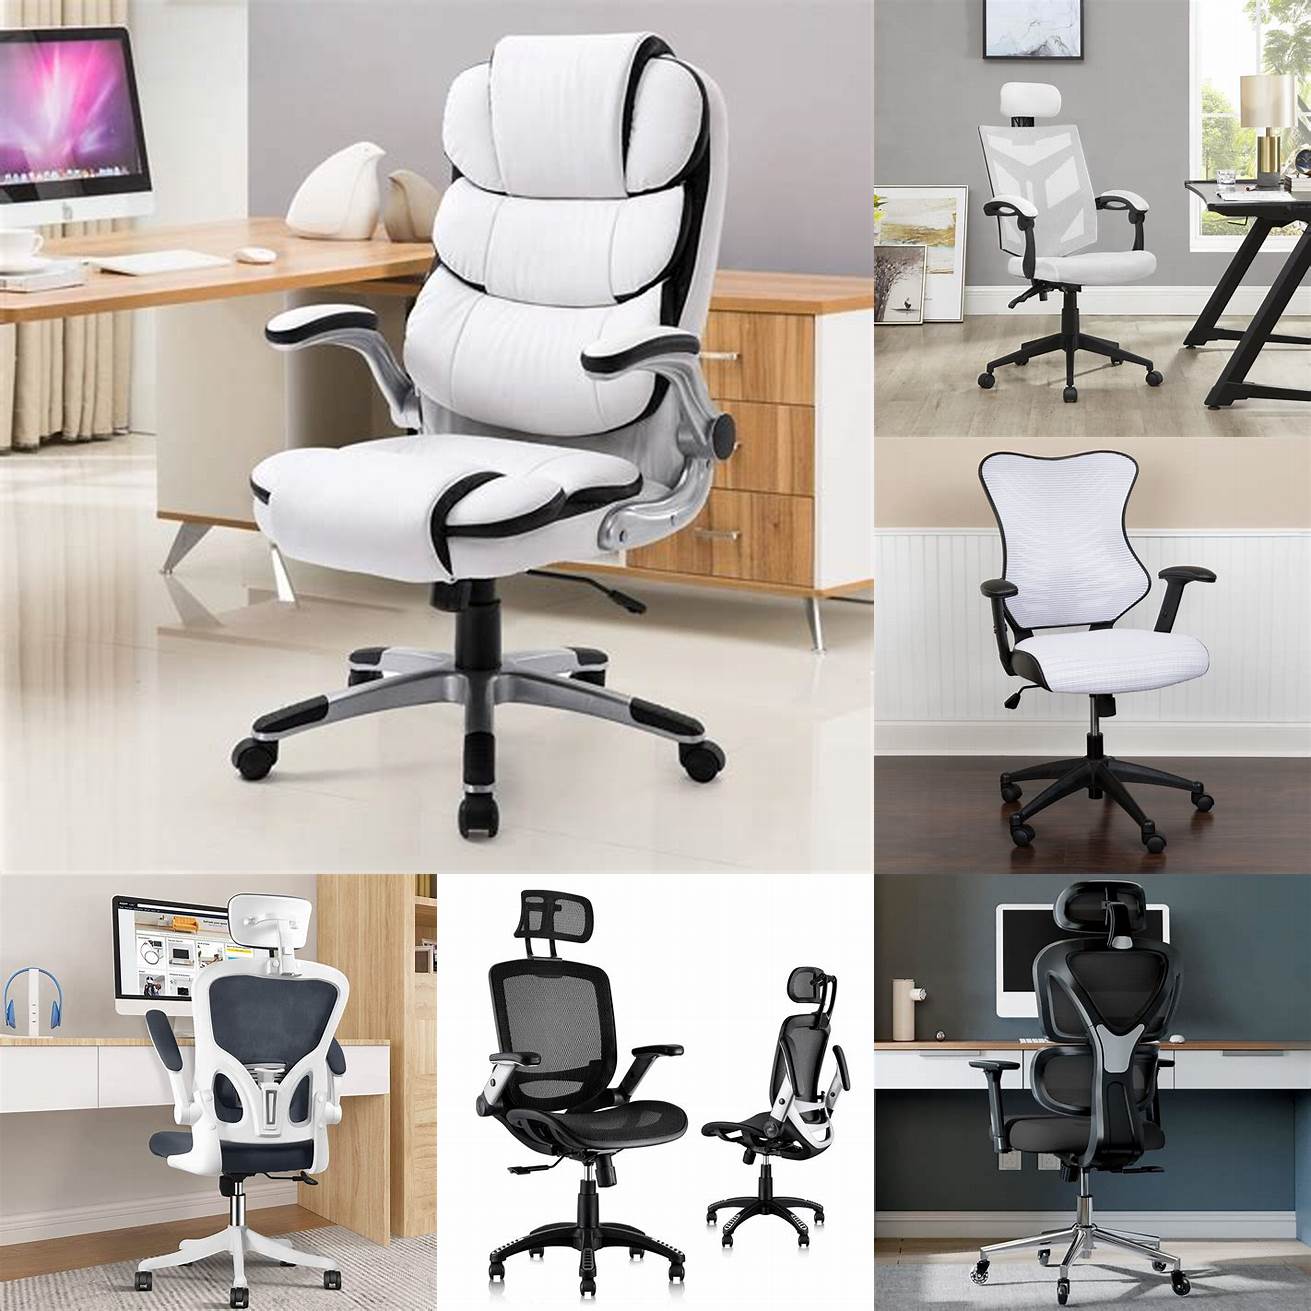 White ergonomic chair with adjustable features